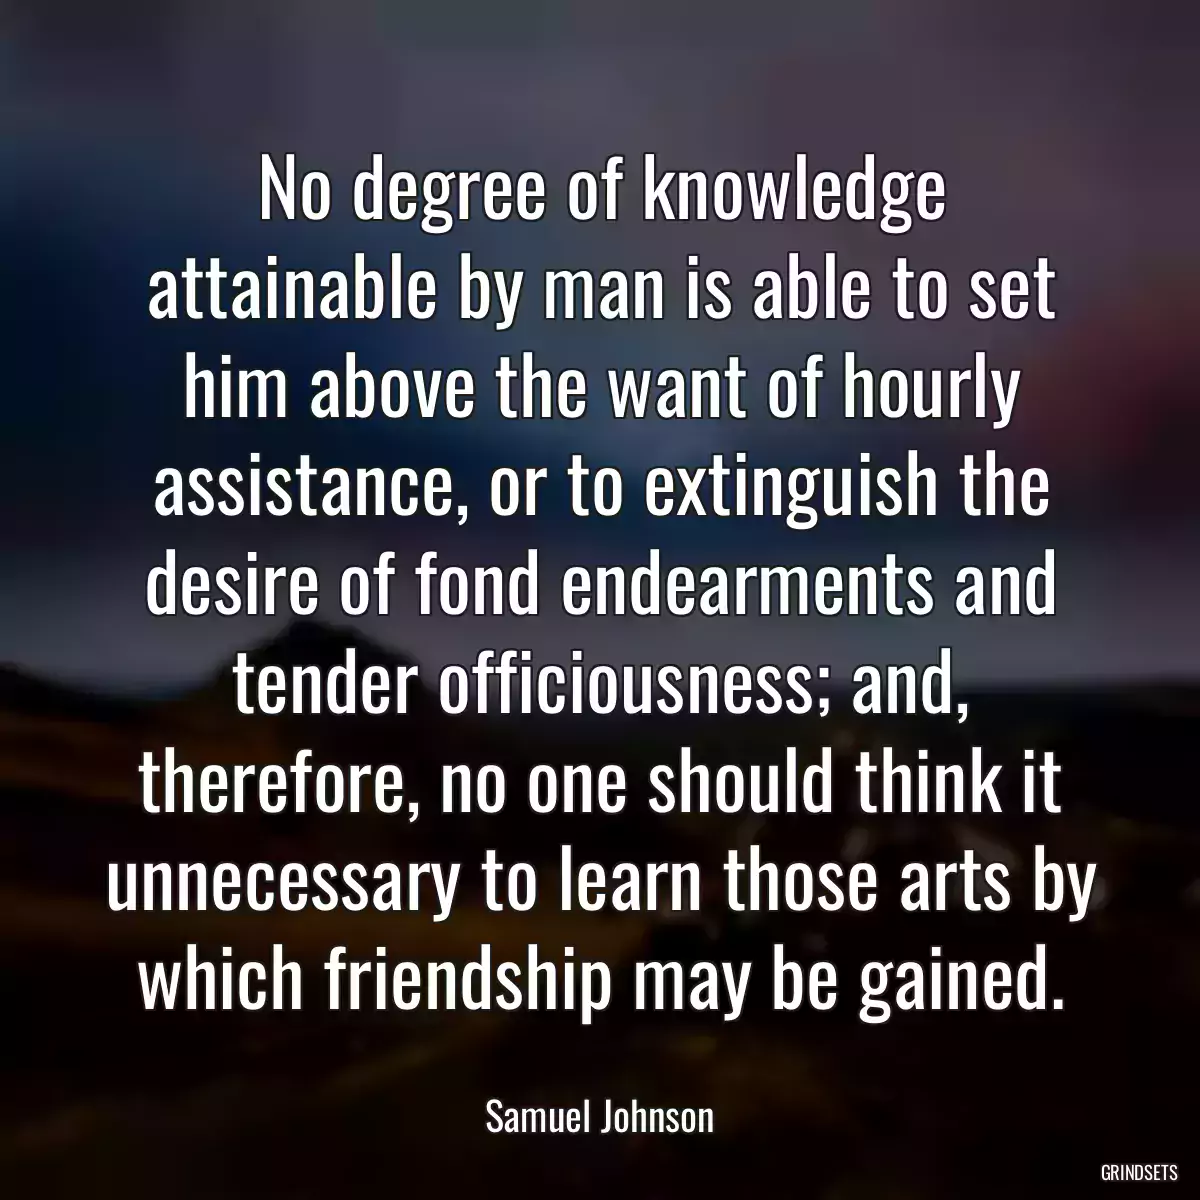 No degree of knowledge attainable by man is able to set him above the want of hourly assistance, or to extinguish the desire of fond endearments and tender officiousness; and, therefore, no one should think it unnecessary to learn those arts by which friendship may be gained.